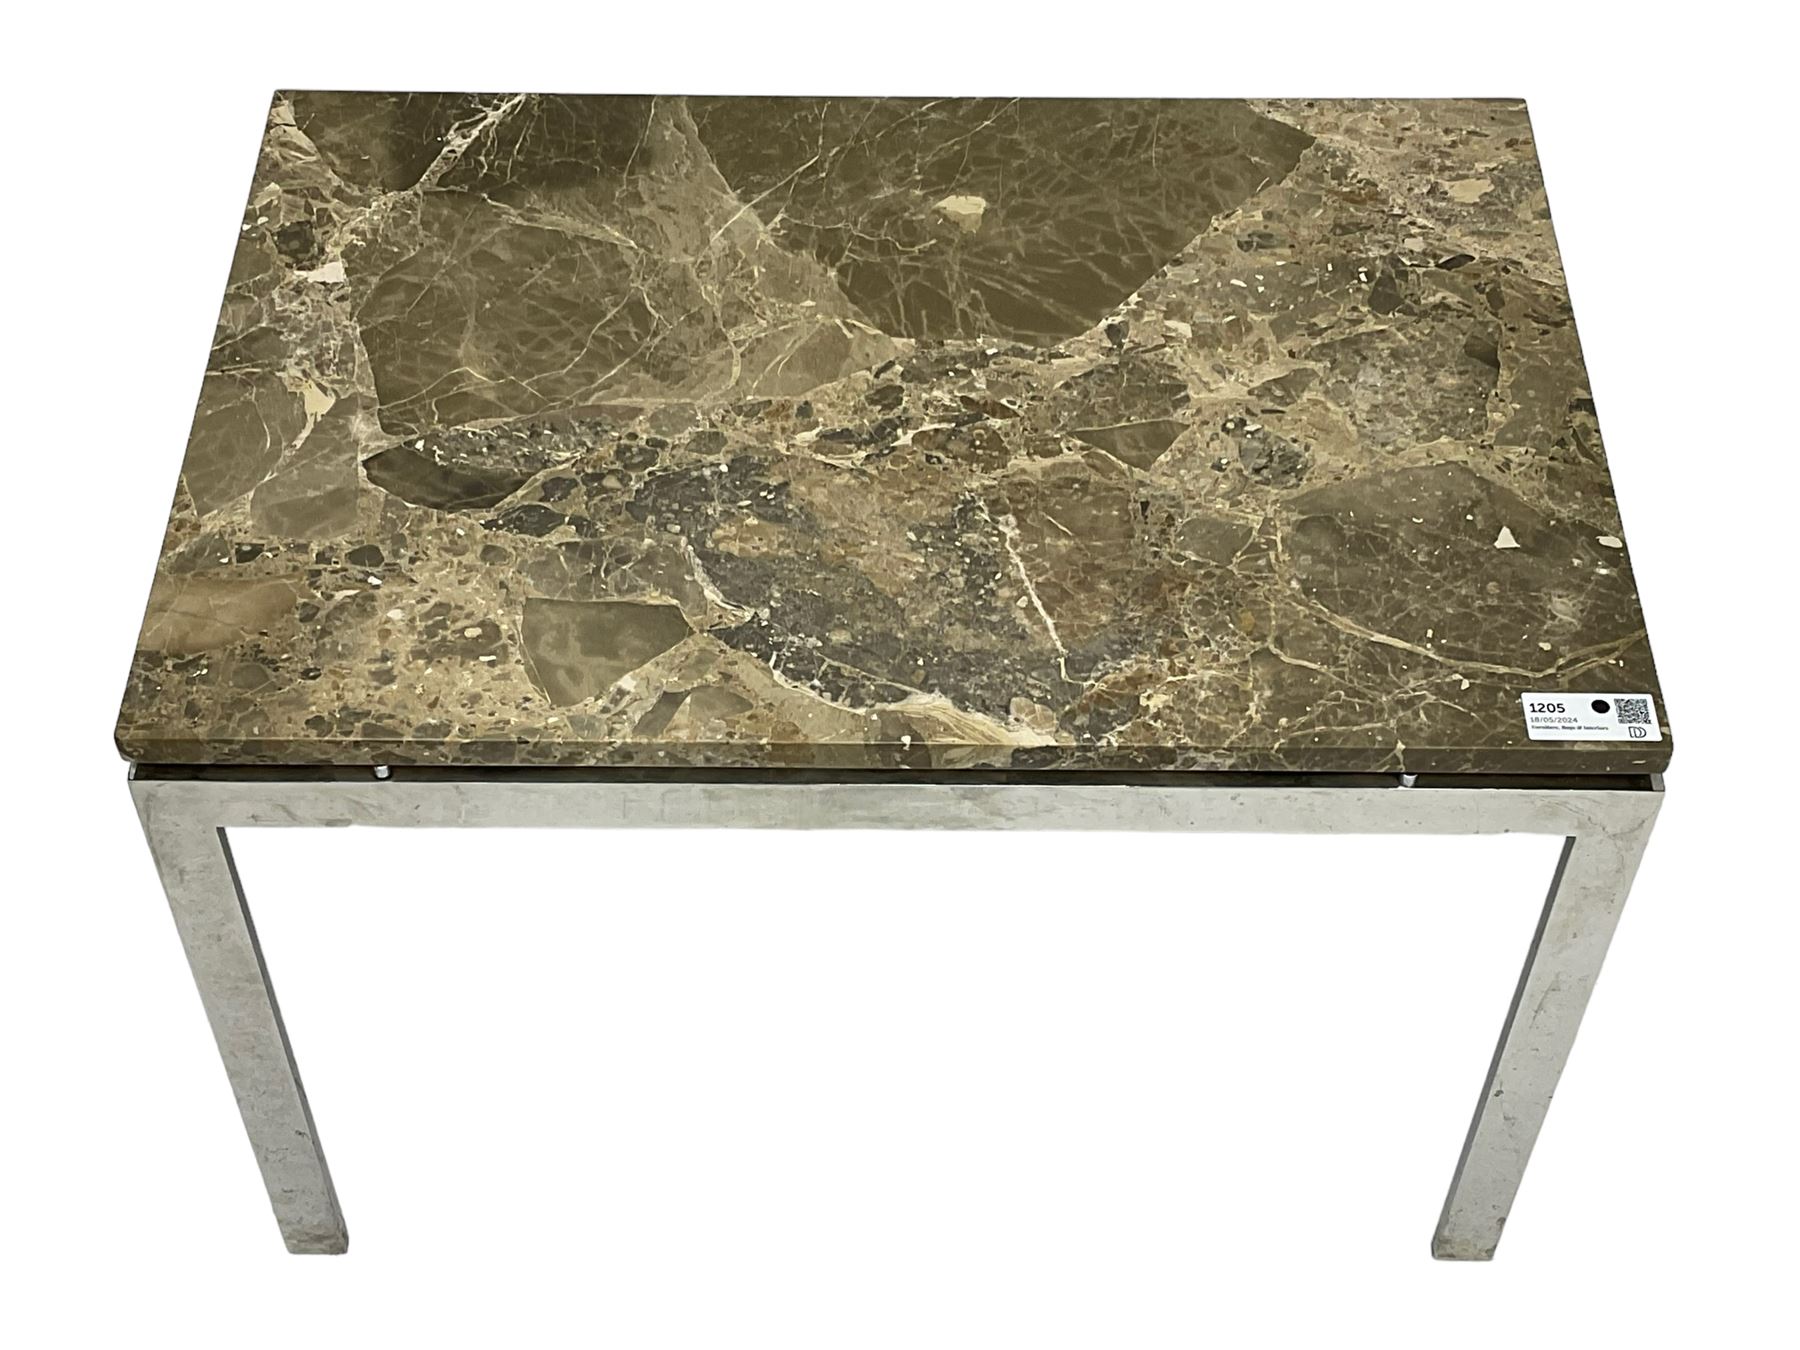 Mid-to-late 20th century marble and metal coffee table - Image 2 of 7